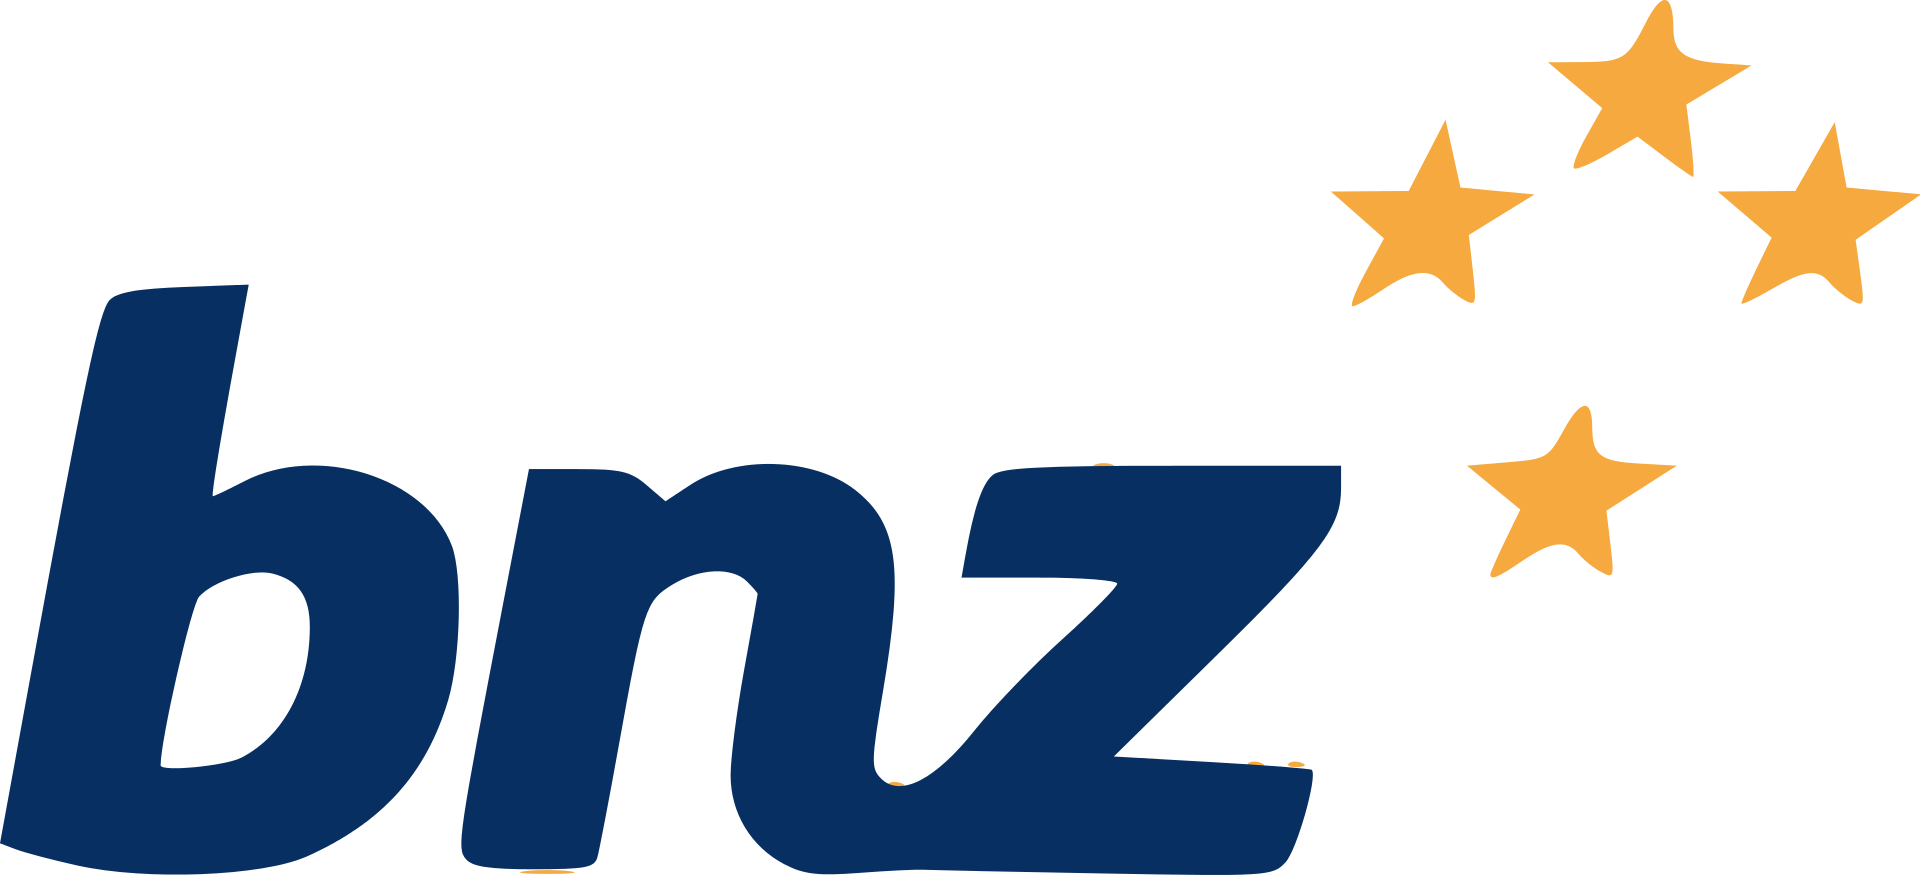 1200px-Bank_of_New_Zealand.svg-2